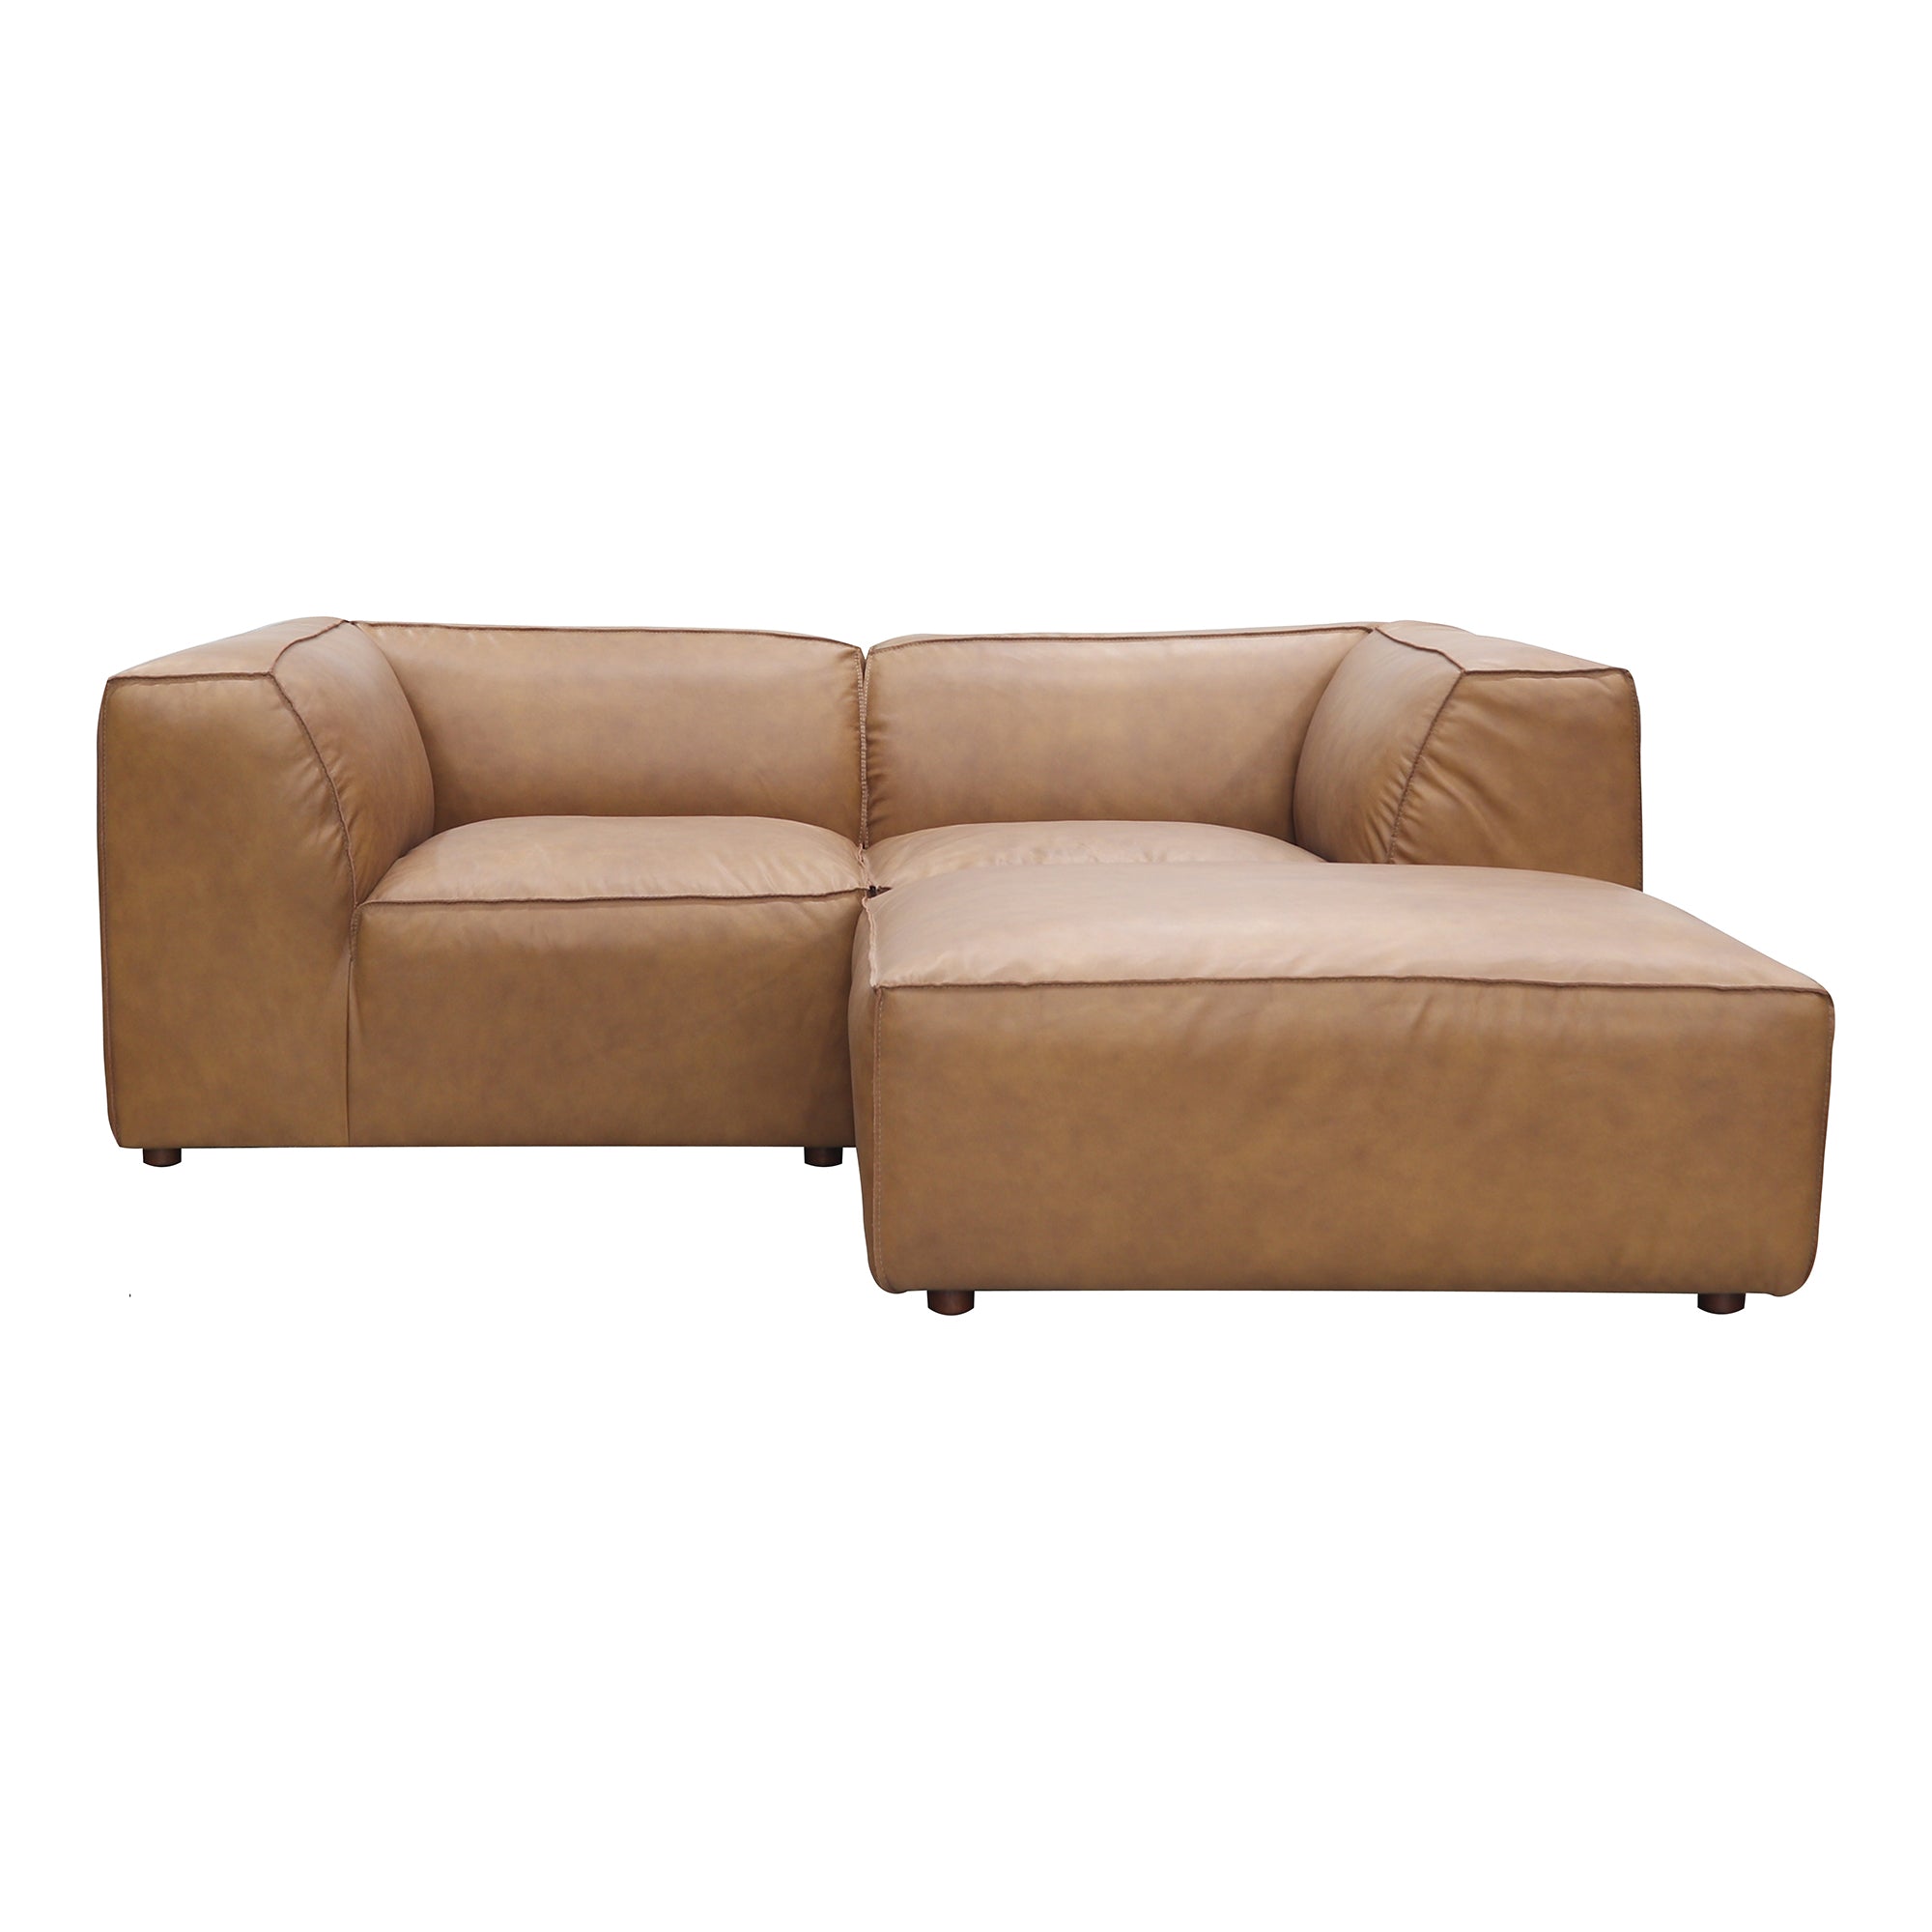 Form Nook Modular Sectional Sonoran Tan Leather | Brown